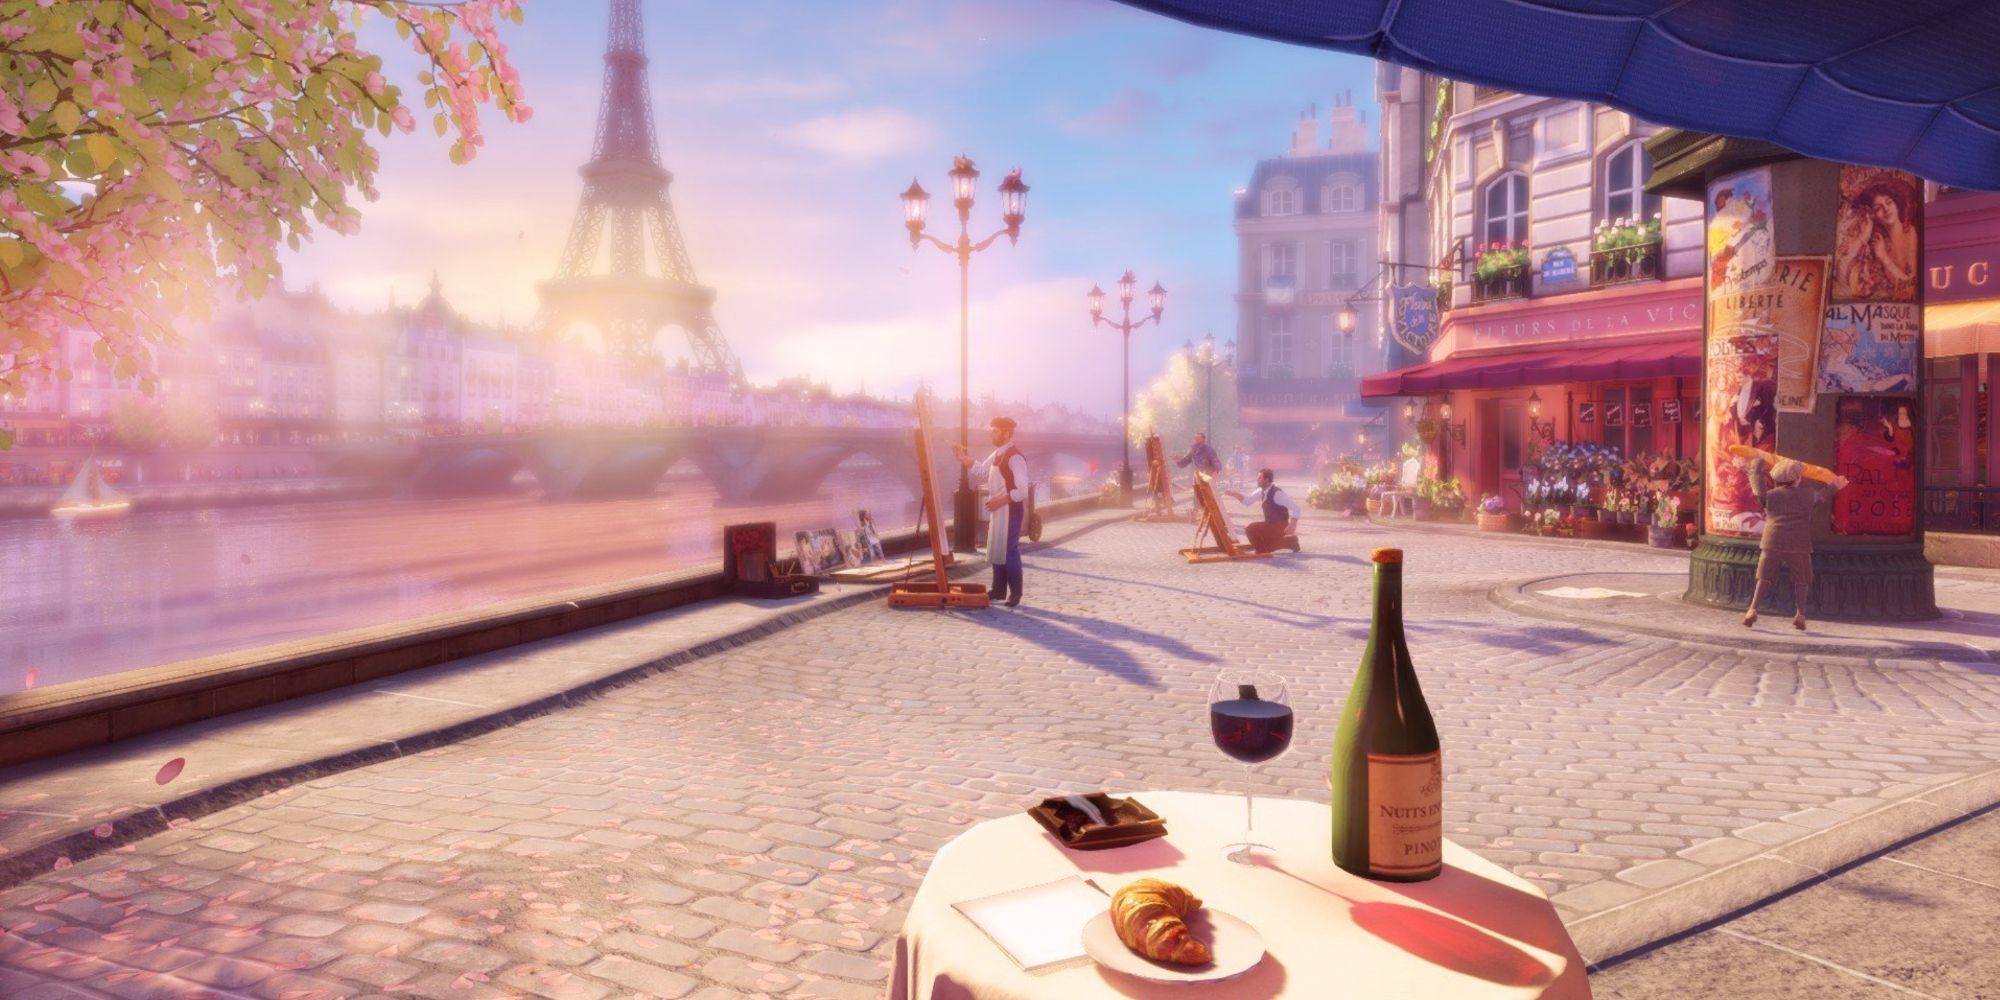 Picturesque view of the Eiffel Tower, River Siene and artists painting in Paris in Bioshock Infinite Burial At Sea DLC.